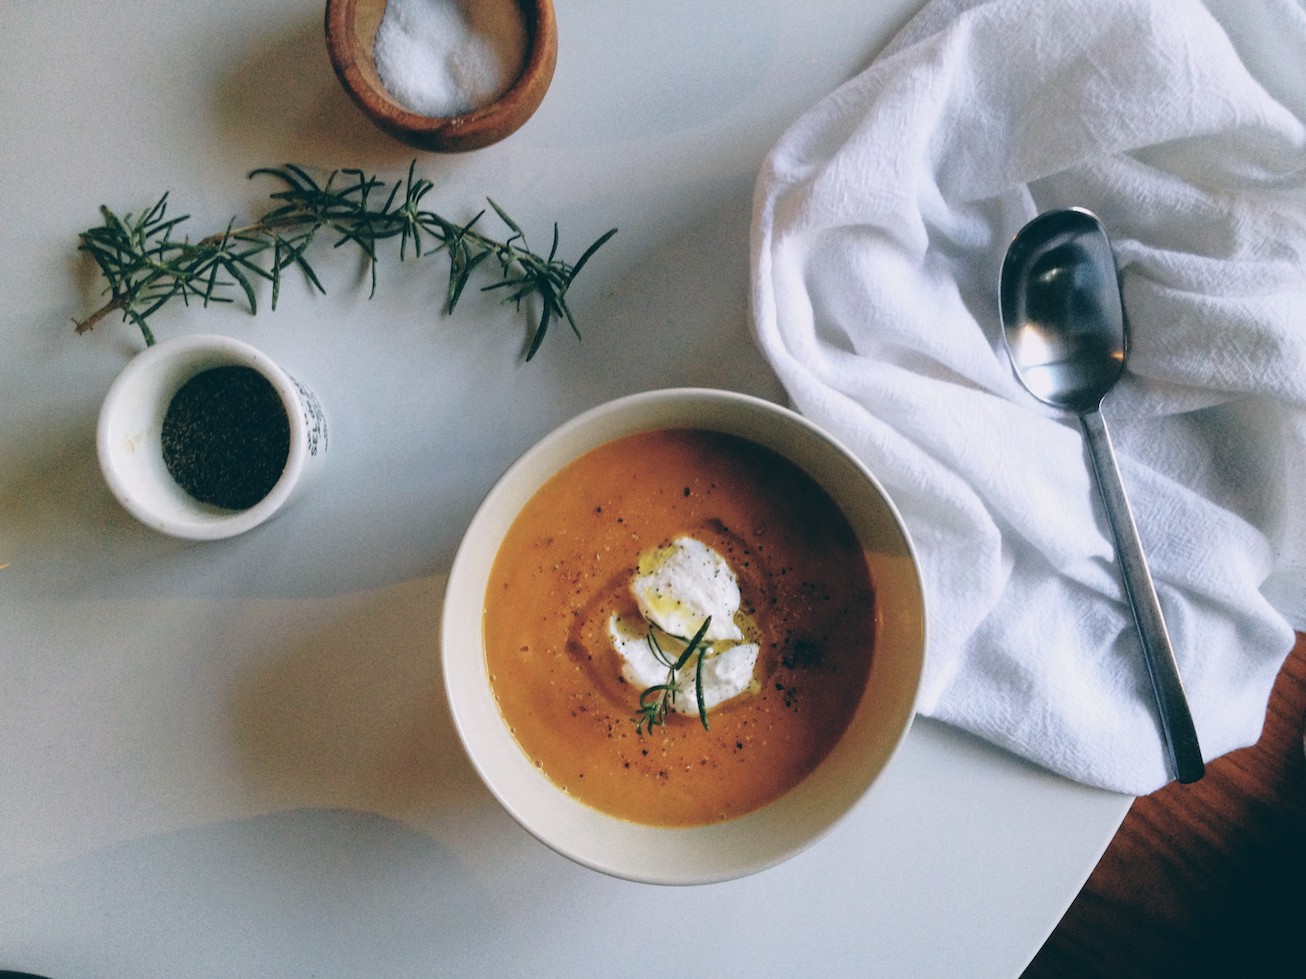 Recipe: Butternut squash soup with apples